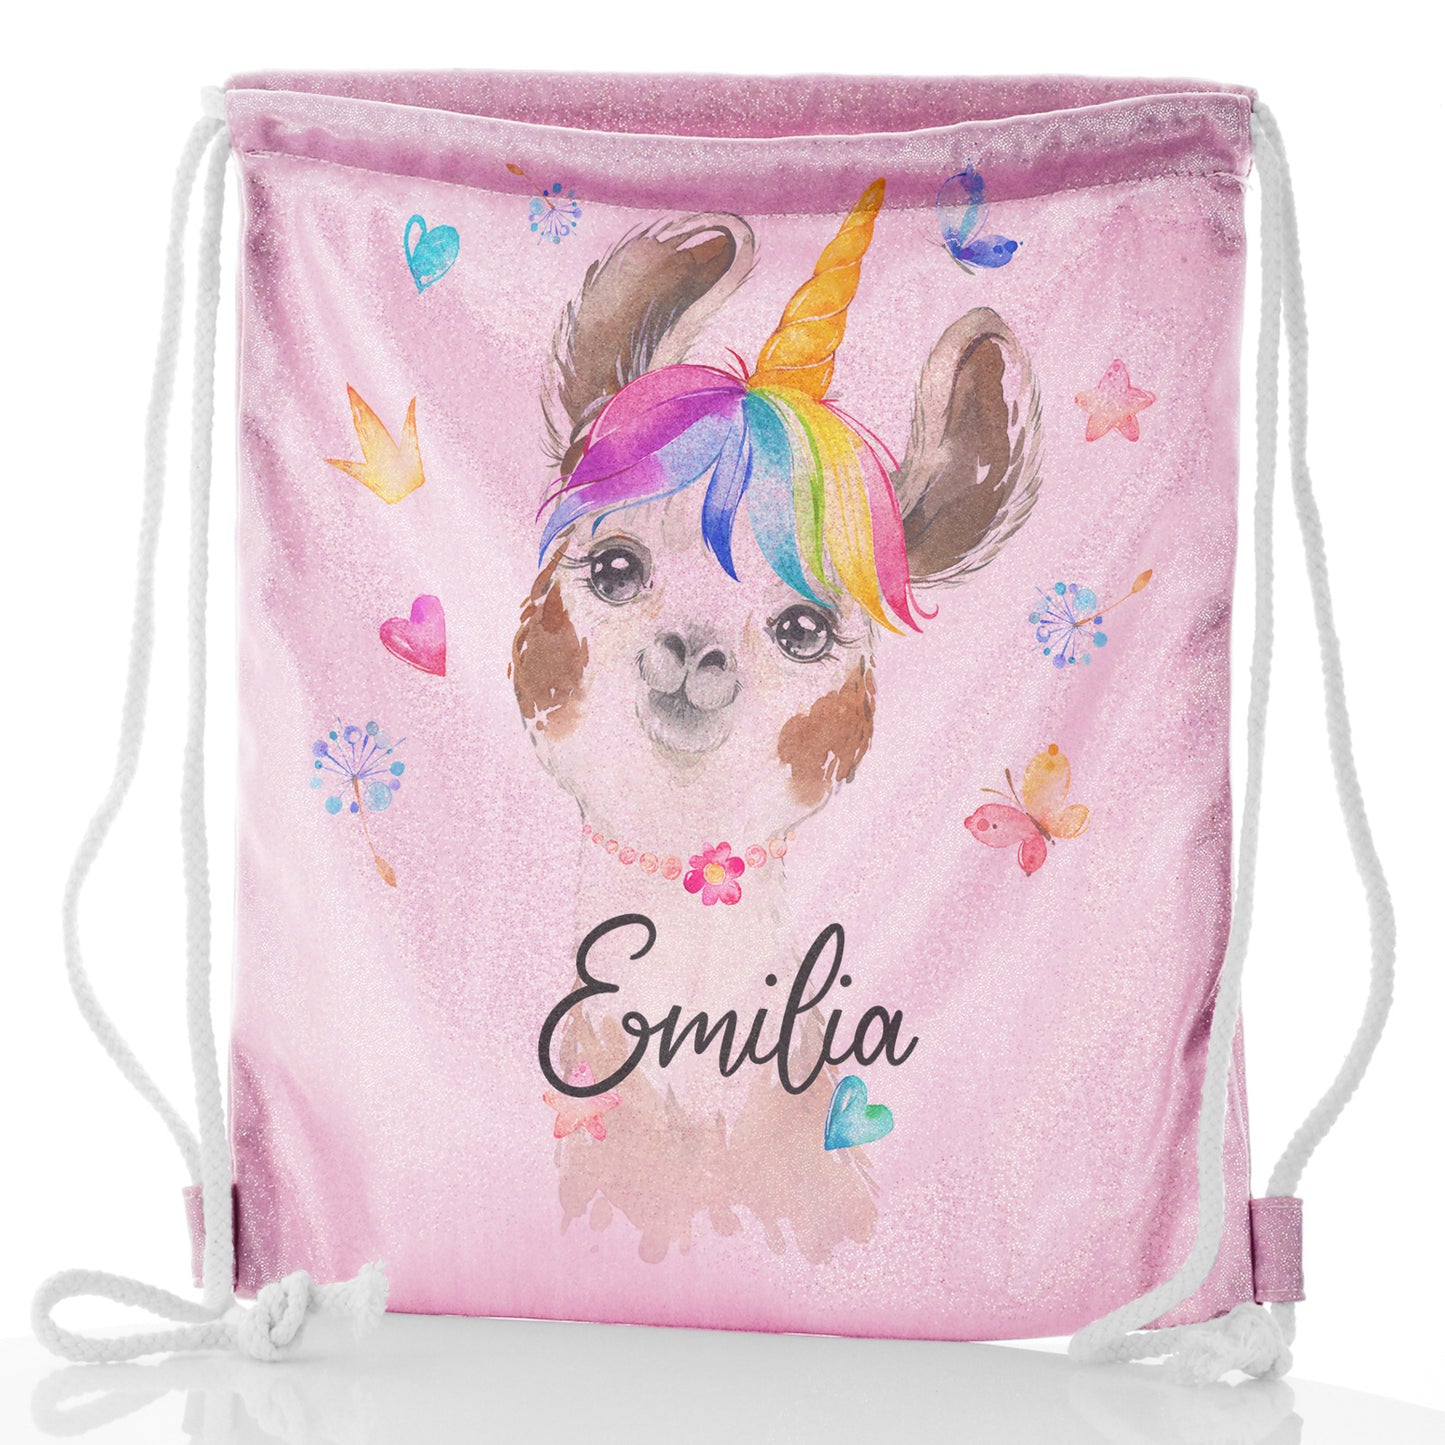 Personalised Glitter Drawstring Backpack with Alpaca Unicorn with Rainbow Hair Hearts Stars and Cute Text